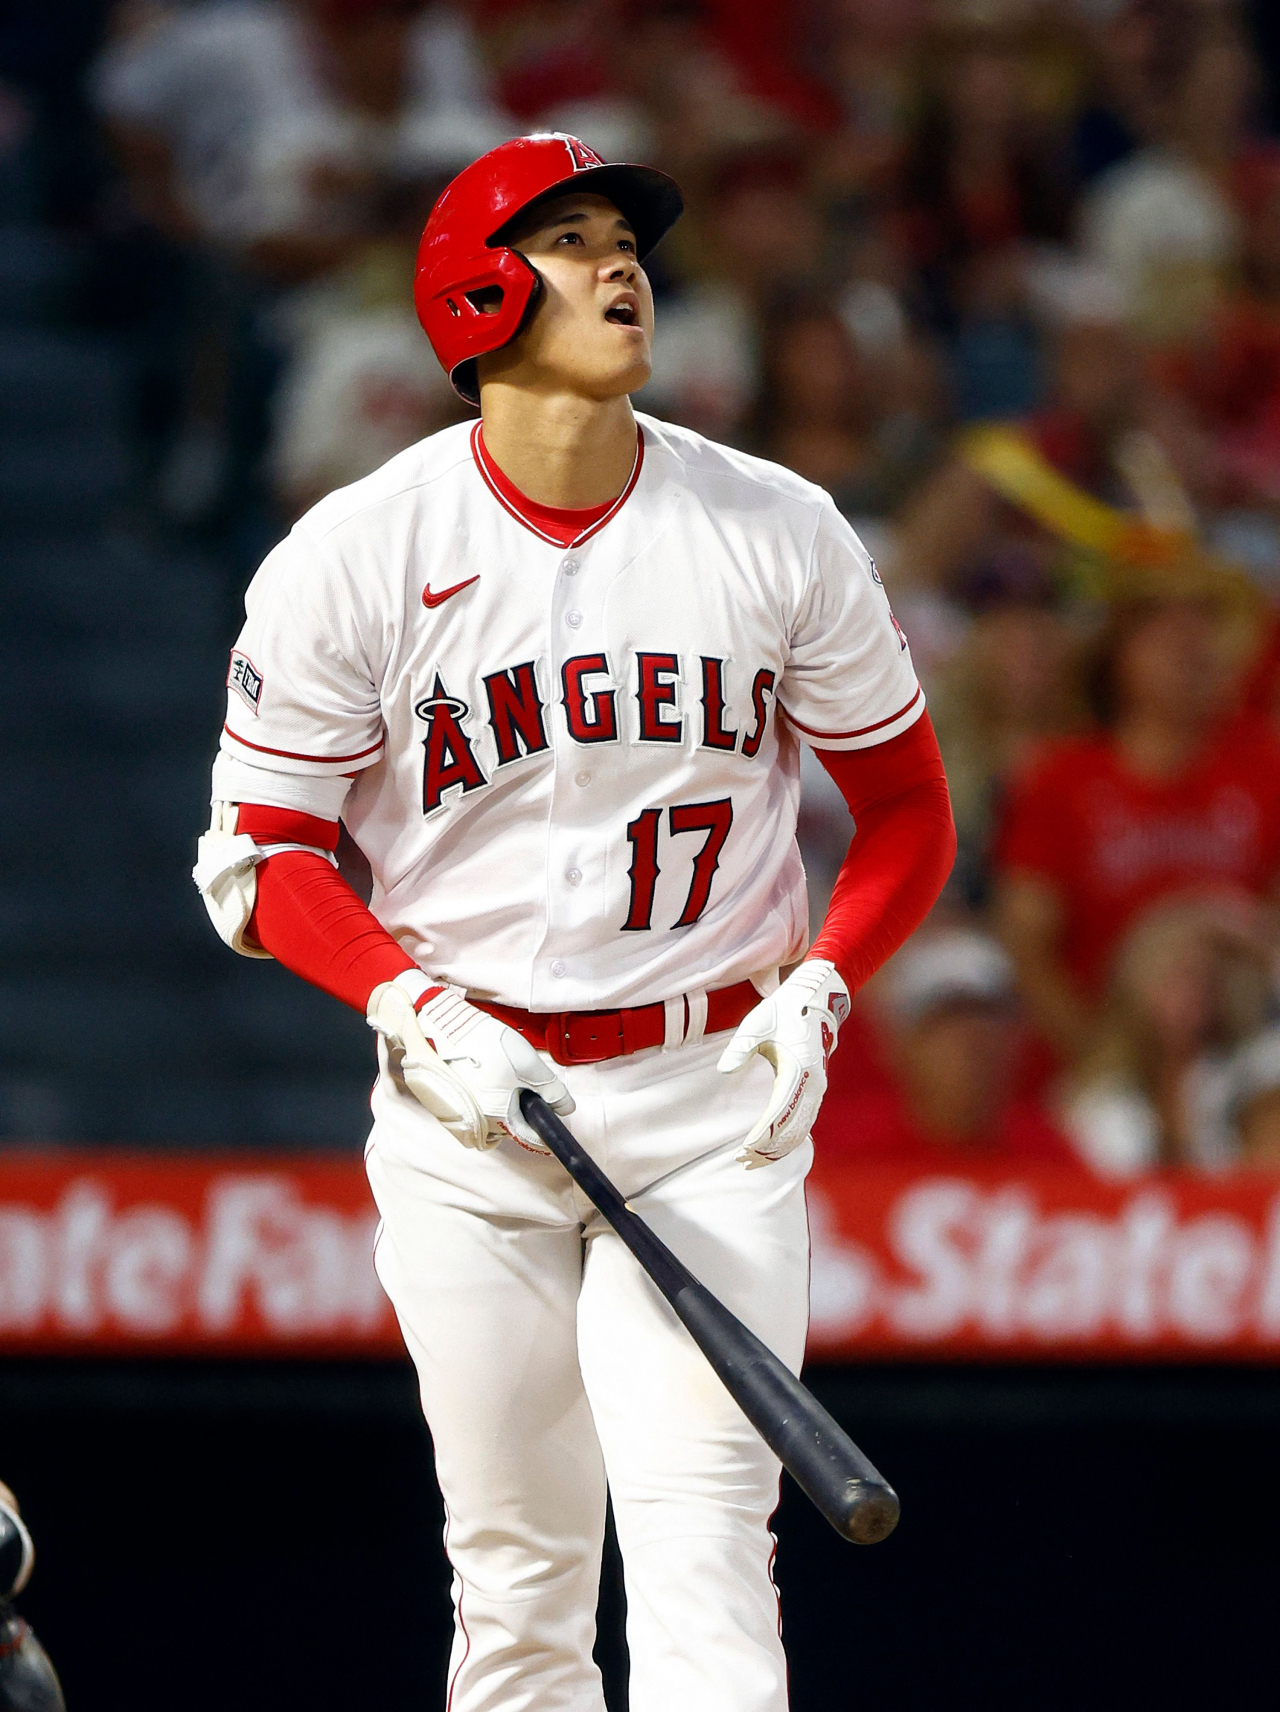 Shohei Ohtani of the Los Angeles Angels hits a home run against the Arizona Diamondbacks in the sixth inning at Angel Stadium of Anaheim on Friday. (Getty Images-AFP)